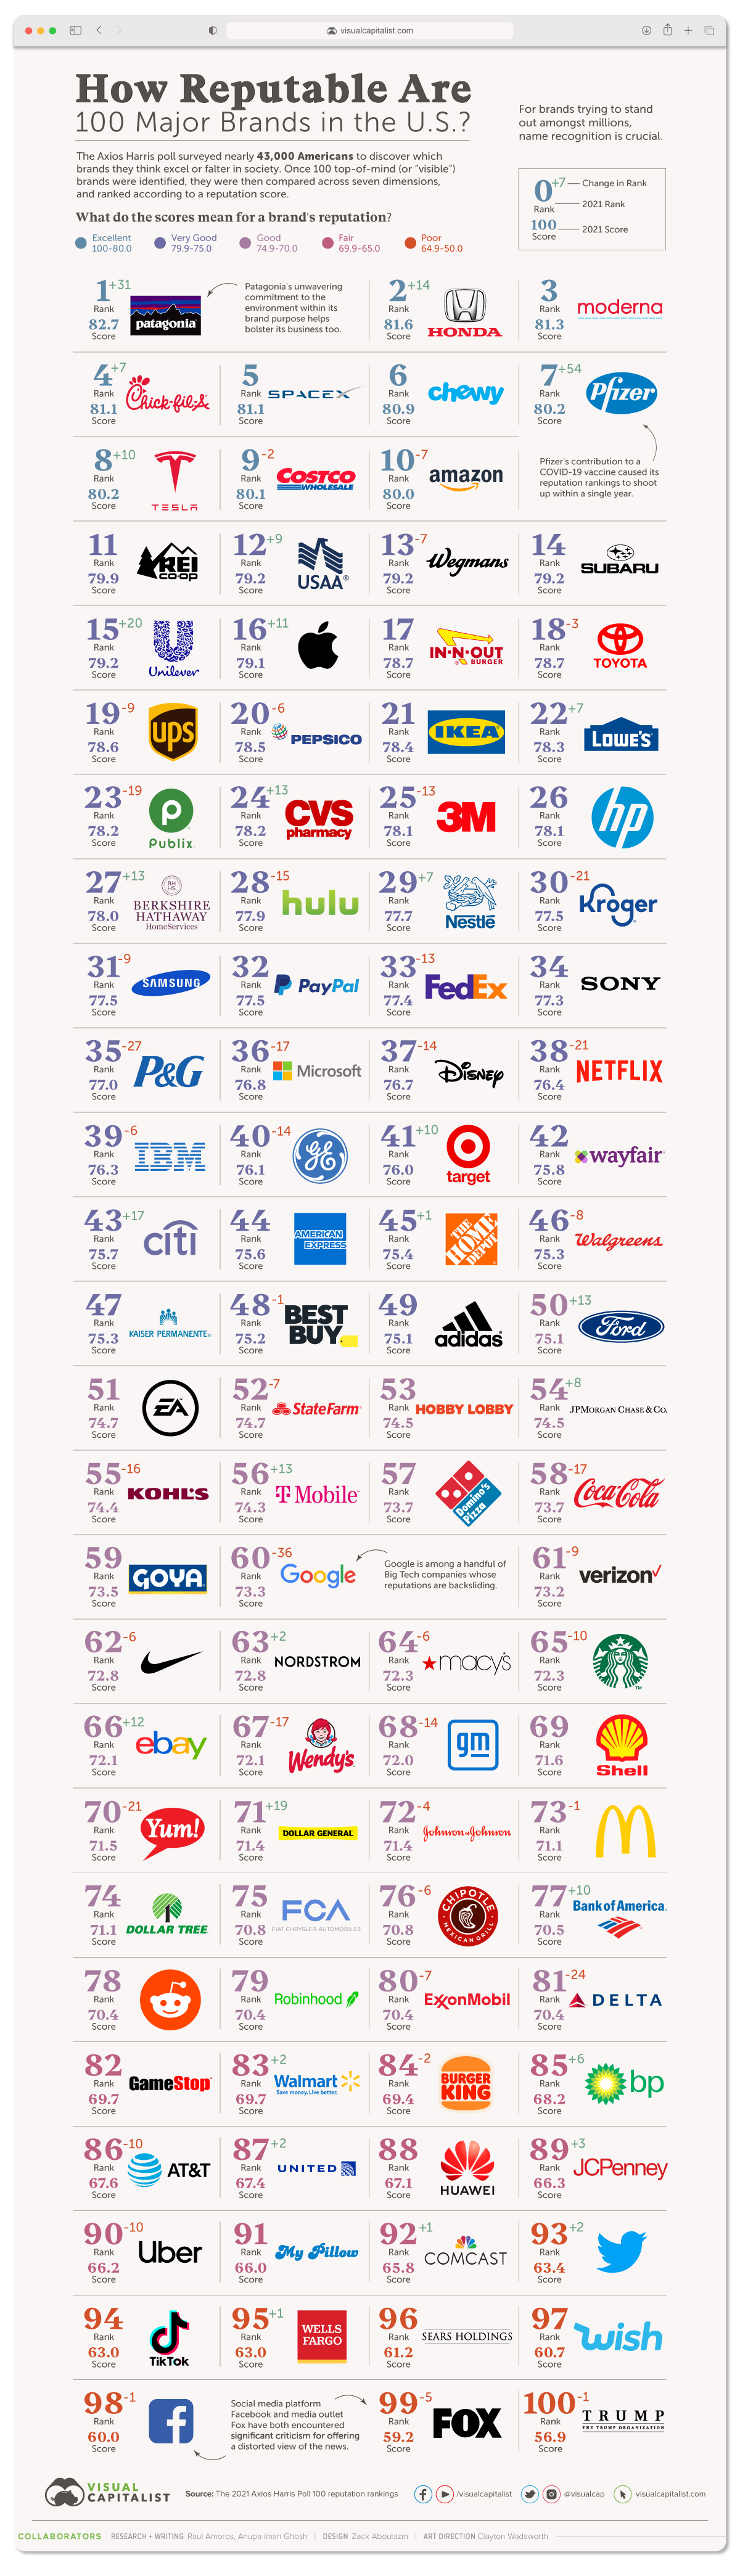 Ranked: The 100 Biggest Public Companies in the World – Visual Capitalist  Licensing